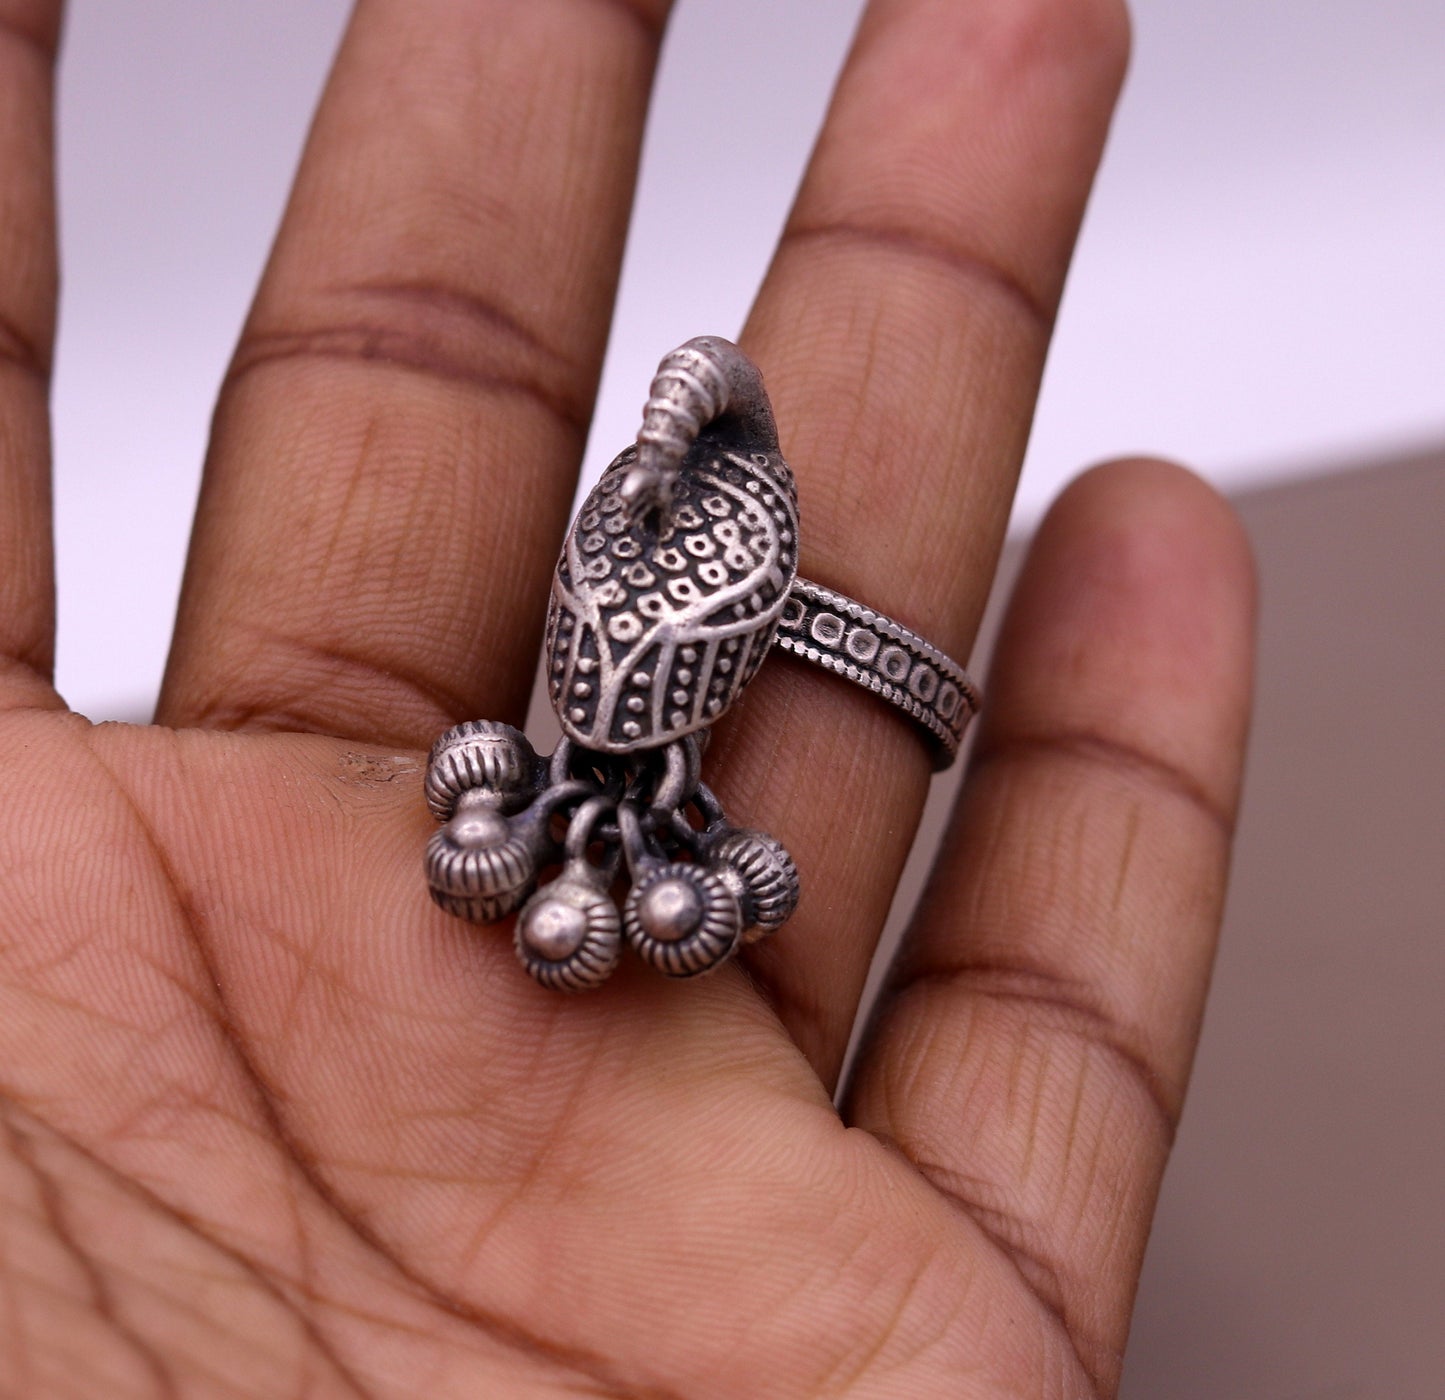 925 sterling silver handmade fabulous peacock design ring with amazing noisy jingle bells excellent customized jewelry for belly dance sr200 - TRIBAL ORNAMENTS